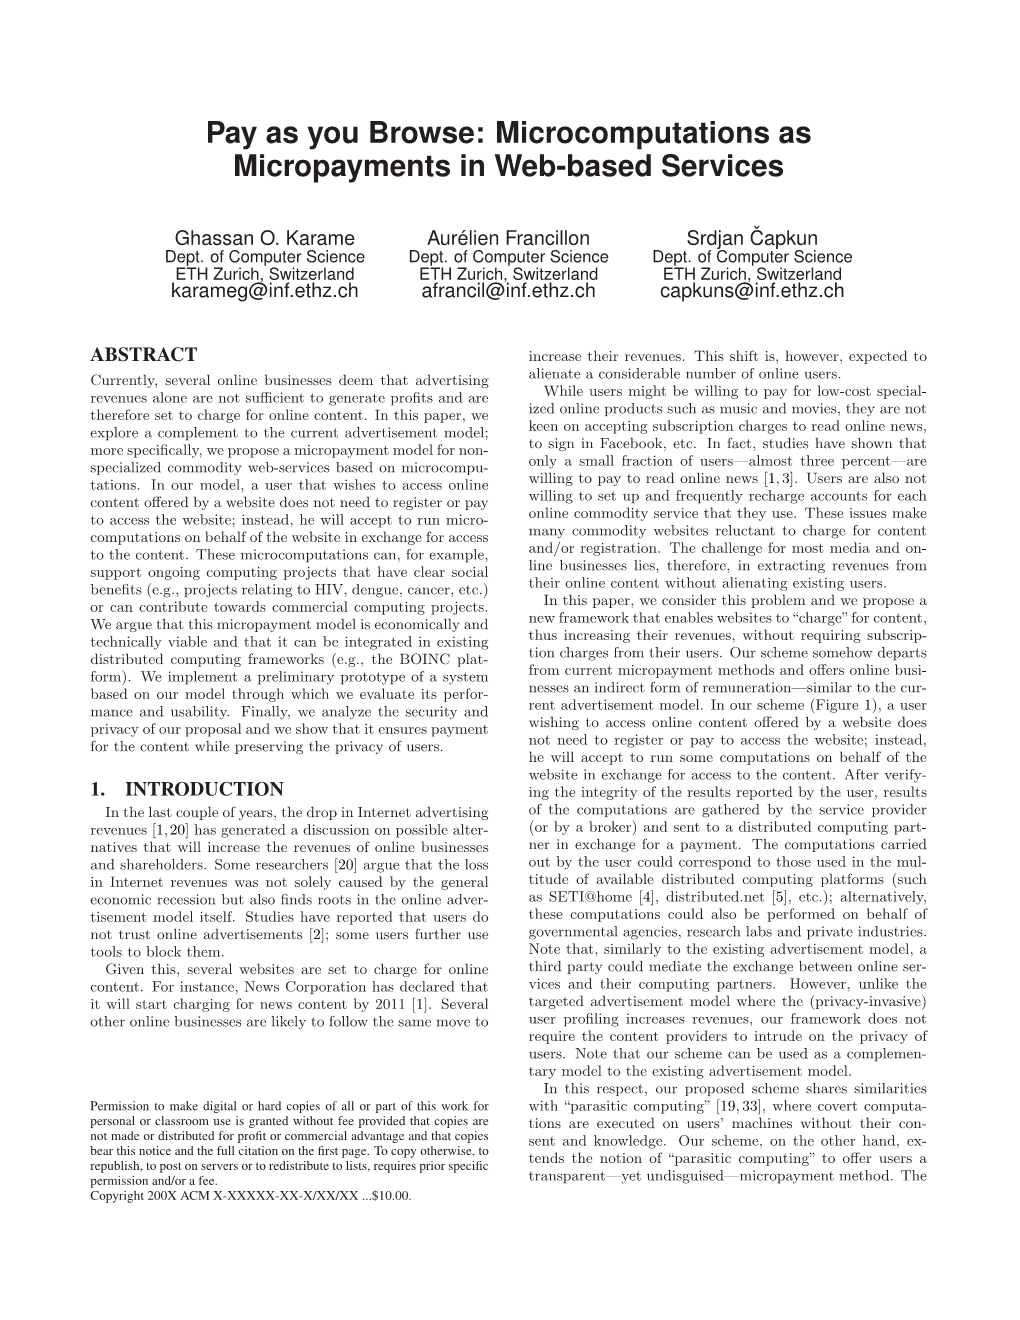 Microcomputations As Micropayments in Web-Based Services